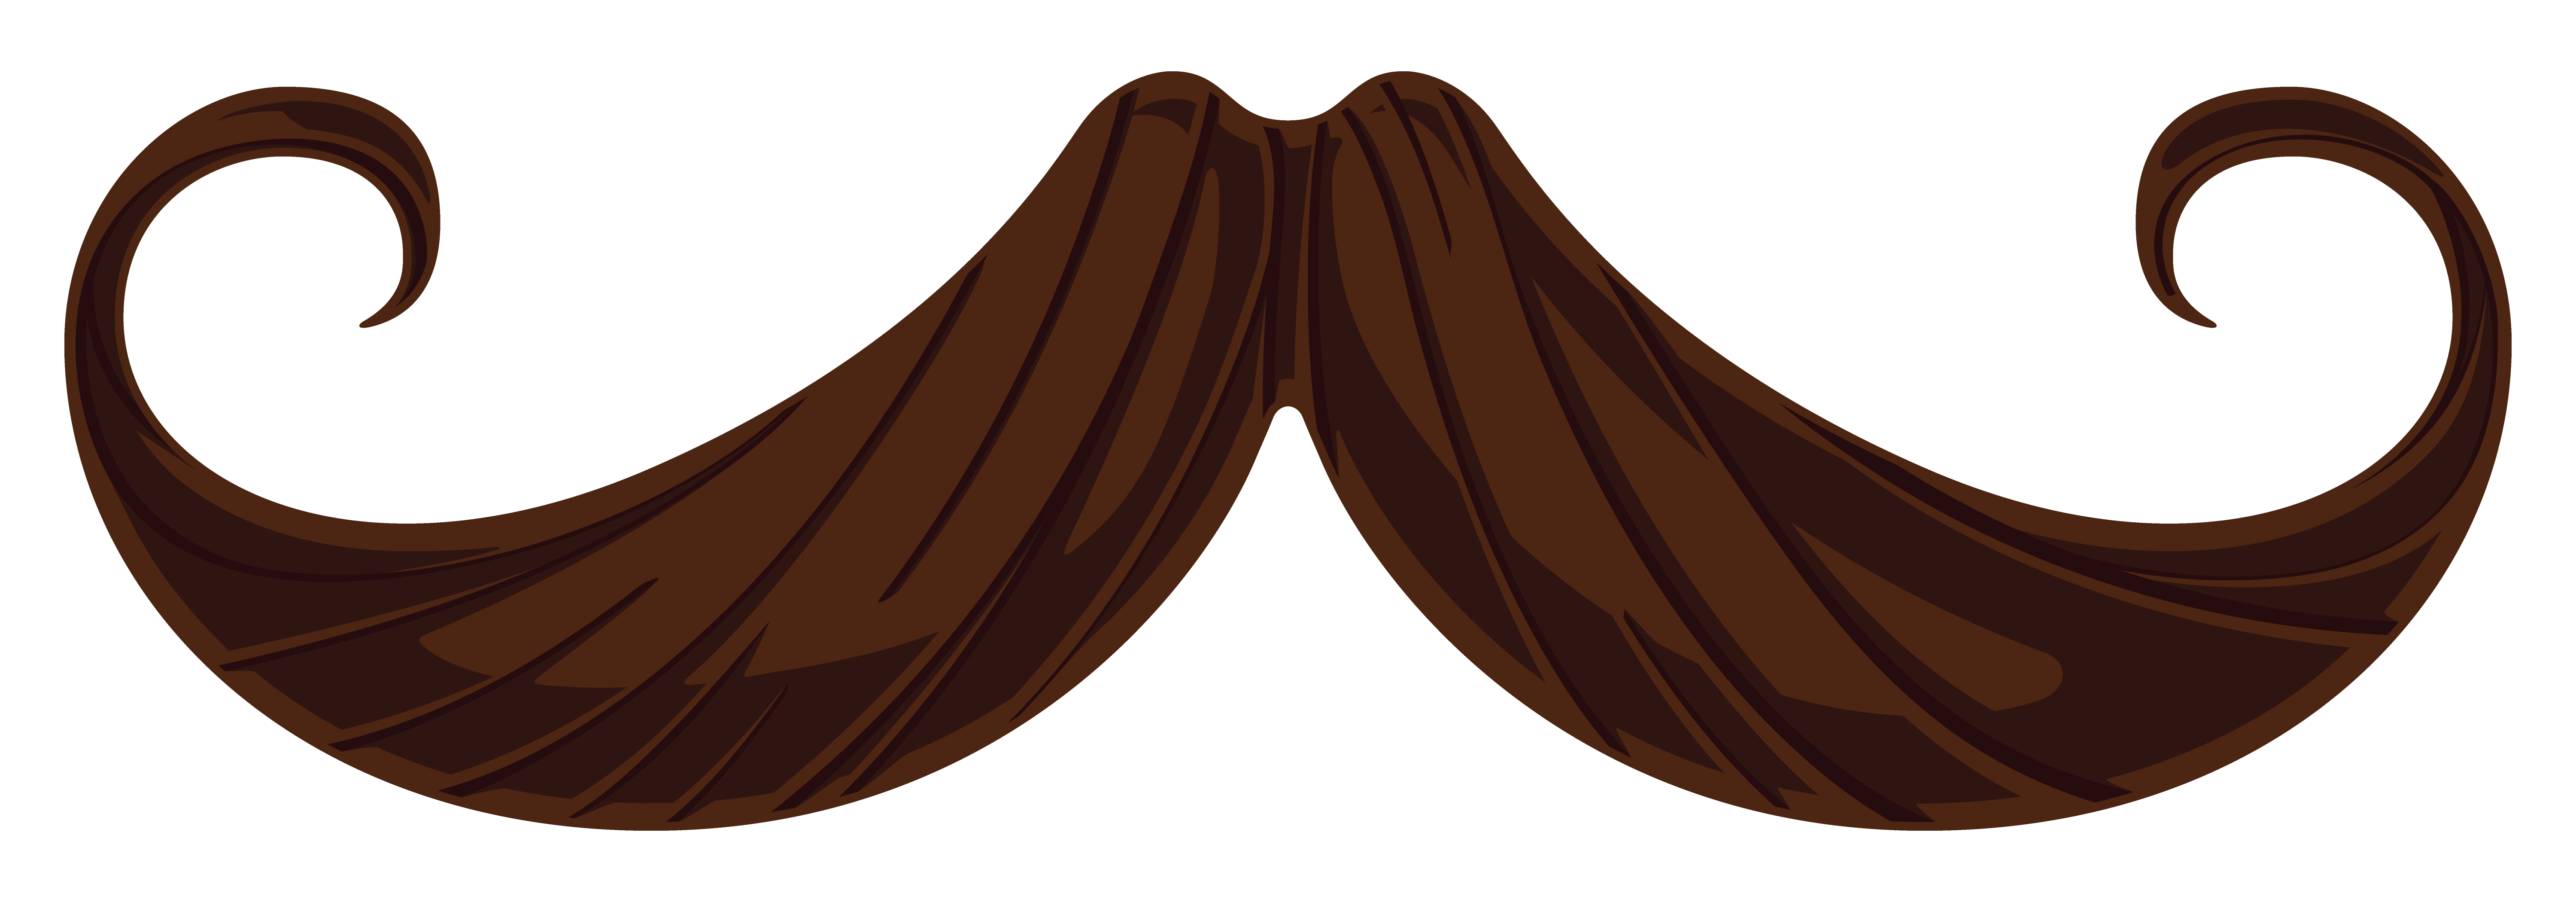 free-mustache-images-free-download-free-mustache-images-free-png